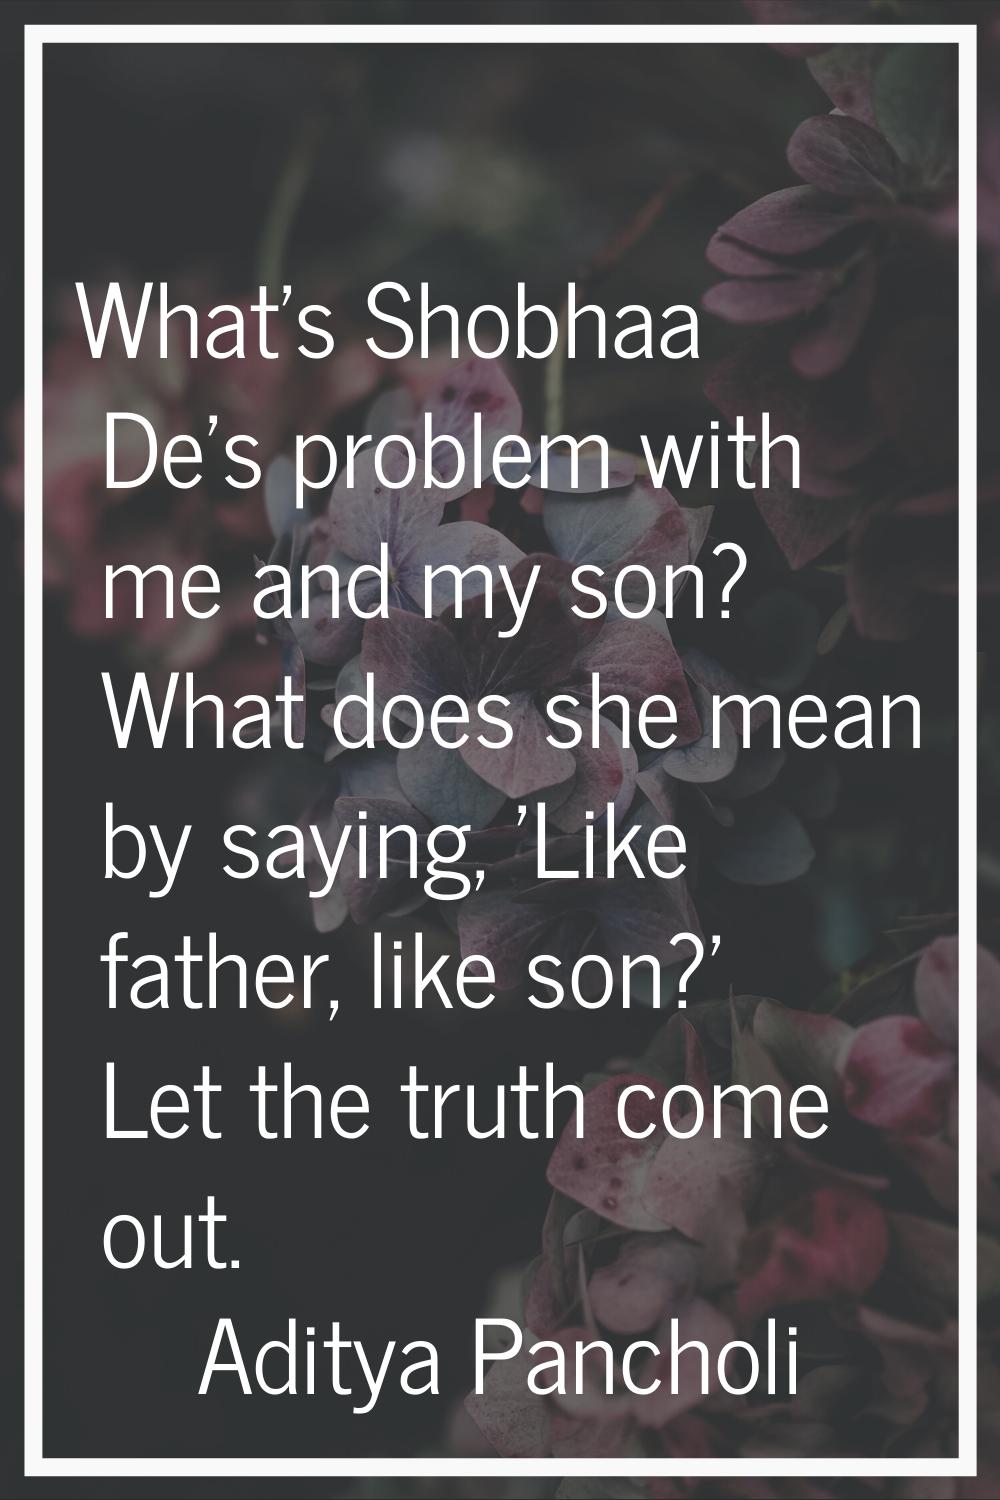 What's Shobhaa De's problem with me and my son? What does she mean by saying, 'Like father, like so